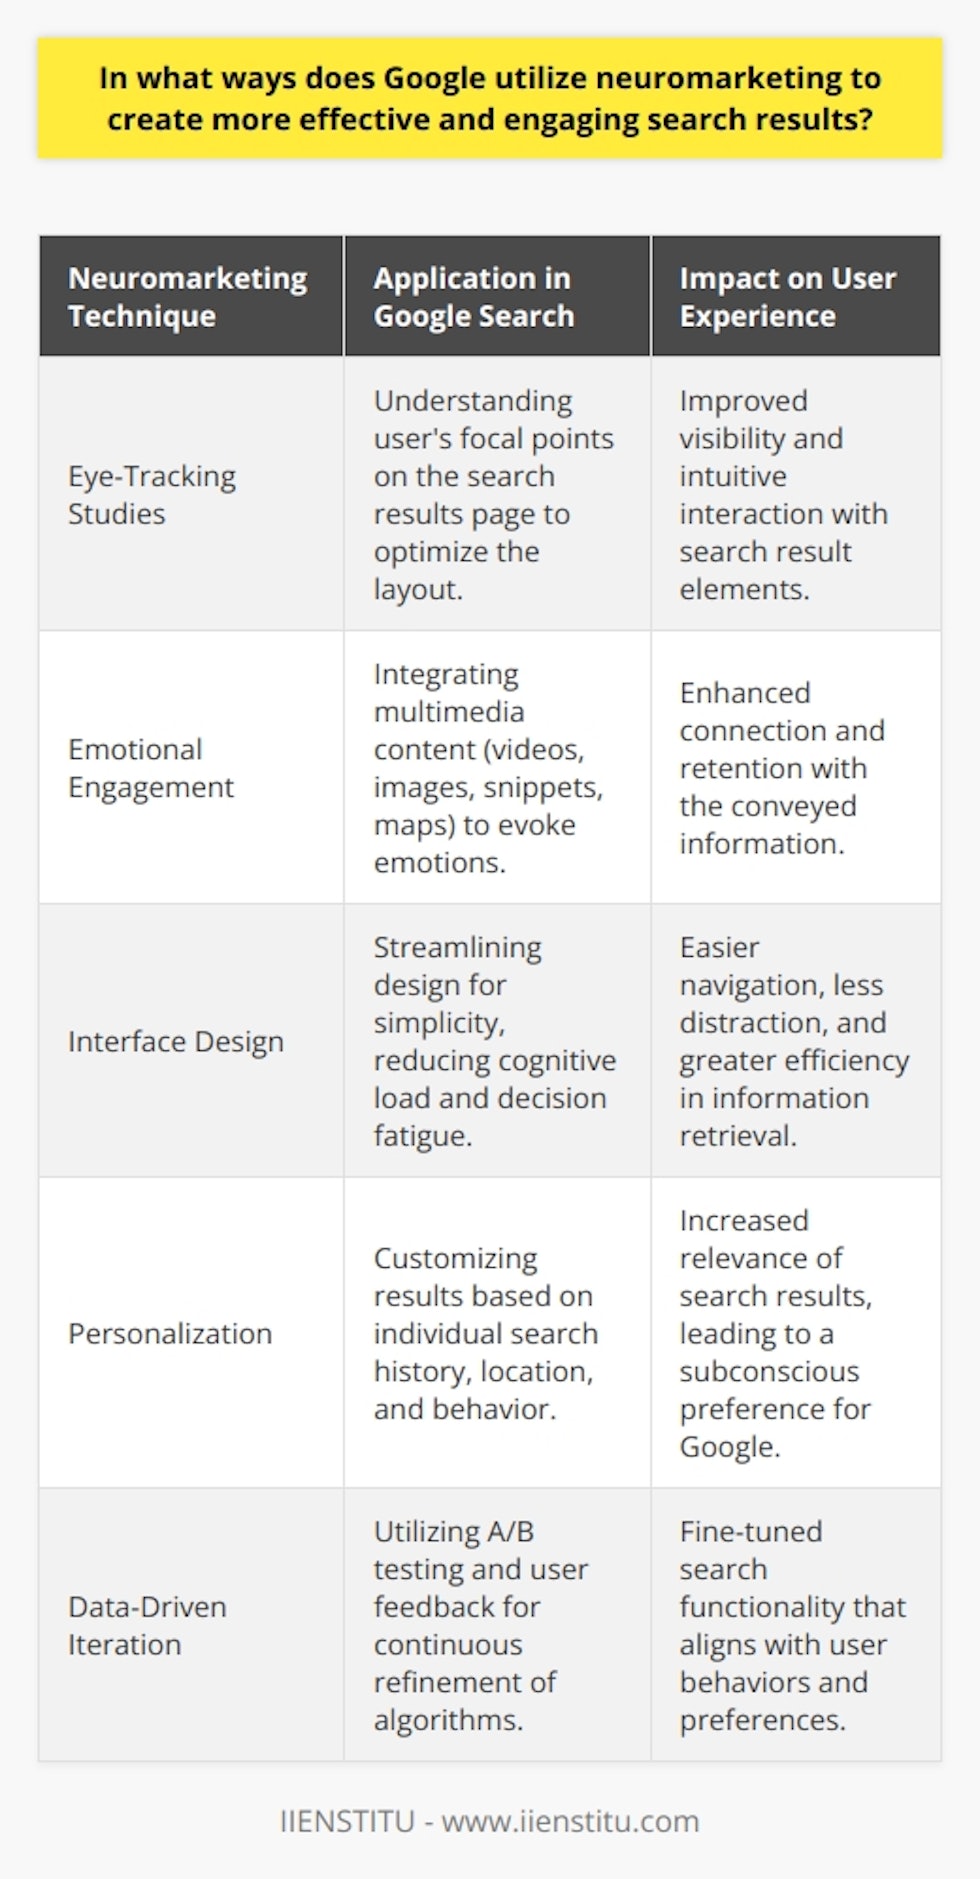 Google Search serves as a primary interface for countless internet users seeking information, and the tech giant has long been known for leveraging various psychological and technical strategies to improve user experience. Applying neuromarketing techniques, Google aims to make search results not only effective in delivering content but also in capturing and maintaining user engagement.Eye-Tracking Studies to Optimize Visual AttentionGoogle's usage of eye-tracking research is significant in understanding how users engage with search results. With these studies, Google can determine which parts of a page users look at first, how long they focus on certain areas, and what content they tend to ignore. This information is invaluable when designing page layouts. By placing key elements where they are more likely to be seen, Google can improve the visibility of critical information and create a more intuitive search experience.Eliciting Emotional Responses with Rich ContentThe incorporation of multimedia elements such as videos, images, and interactive elements like featured snippets and maps directly influences users' emotional reactions to search results. Google understands that people are more likely to connect with and remember content that elicits an emotional response. By enriching search results with diverse and high-quality content, Google aims to make the search not just informational but also engaging on an emotional level, which can help to increase users' perceived value of the platform and search results.Designing a User-Friendly InterfaceThe design philosophy of Google's search interface revolves around simplicity and ease of use. Neuromarketing research underlines the importance of an intuitive layout that reduces cognitive load and decision fatigue. Google consistently streamlines its interface to make the user's path to information as frictionless as possible. The minimalist design with ample white space and clearly distinguished search results helps users navigate the page with minimum distraction and maximum efficiency.Personalizing Search Results for Maximum RelevancePersonalization in search results is another aspect where neuromarketing insights come into play. Recognizing the cognitive bias towards content that reflects personal interests and past behaviors, Google customizes search results for individuals based on their search history, location, and other available data. Tailored results not only make the search more relevant and efficient for the user but also instill a subconscious preference for Google’s search engine, as it seemingly understands and caters to individual needs.Adopting a Data-Driven Approach for Constant EvolutionGoogle's commitment to improving its search results is an ongoing process, heavily reliant on neuromarketing data. The company conducts countless A/B tests and analyzes user feedback to refine its algorithms and interfaces. Understanding behavioral patterns, preferences, and pain points allows Google to make iterative changes that seemingly minor can significantly impact user experience and satisfaction.Through these and other neuromarketing methodologies, Google continually refines the interplay between its search algorithms and the human brain. By putting these insights into practice, Google ensures their search results not only provide answers but also deliver them in a manner that is psychologically attuned to the users' needs and preferences, further solidifying their position as a leader in search engine technology.